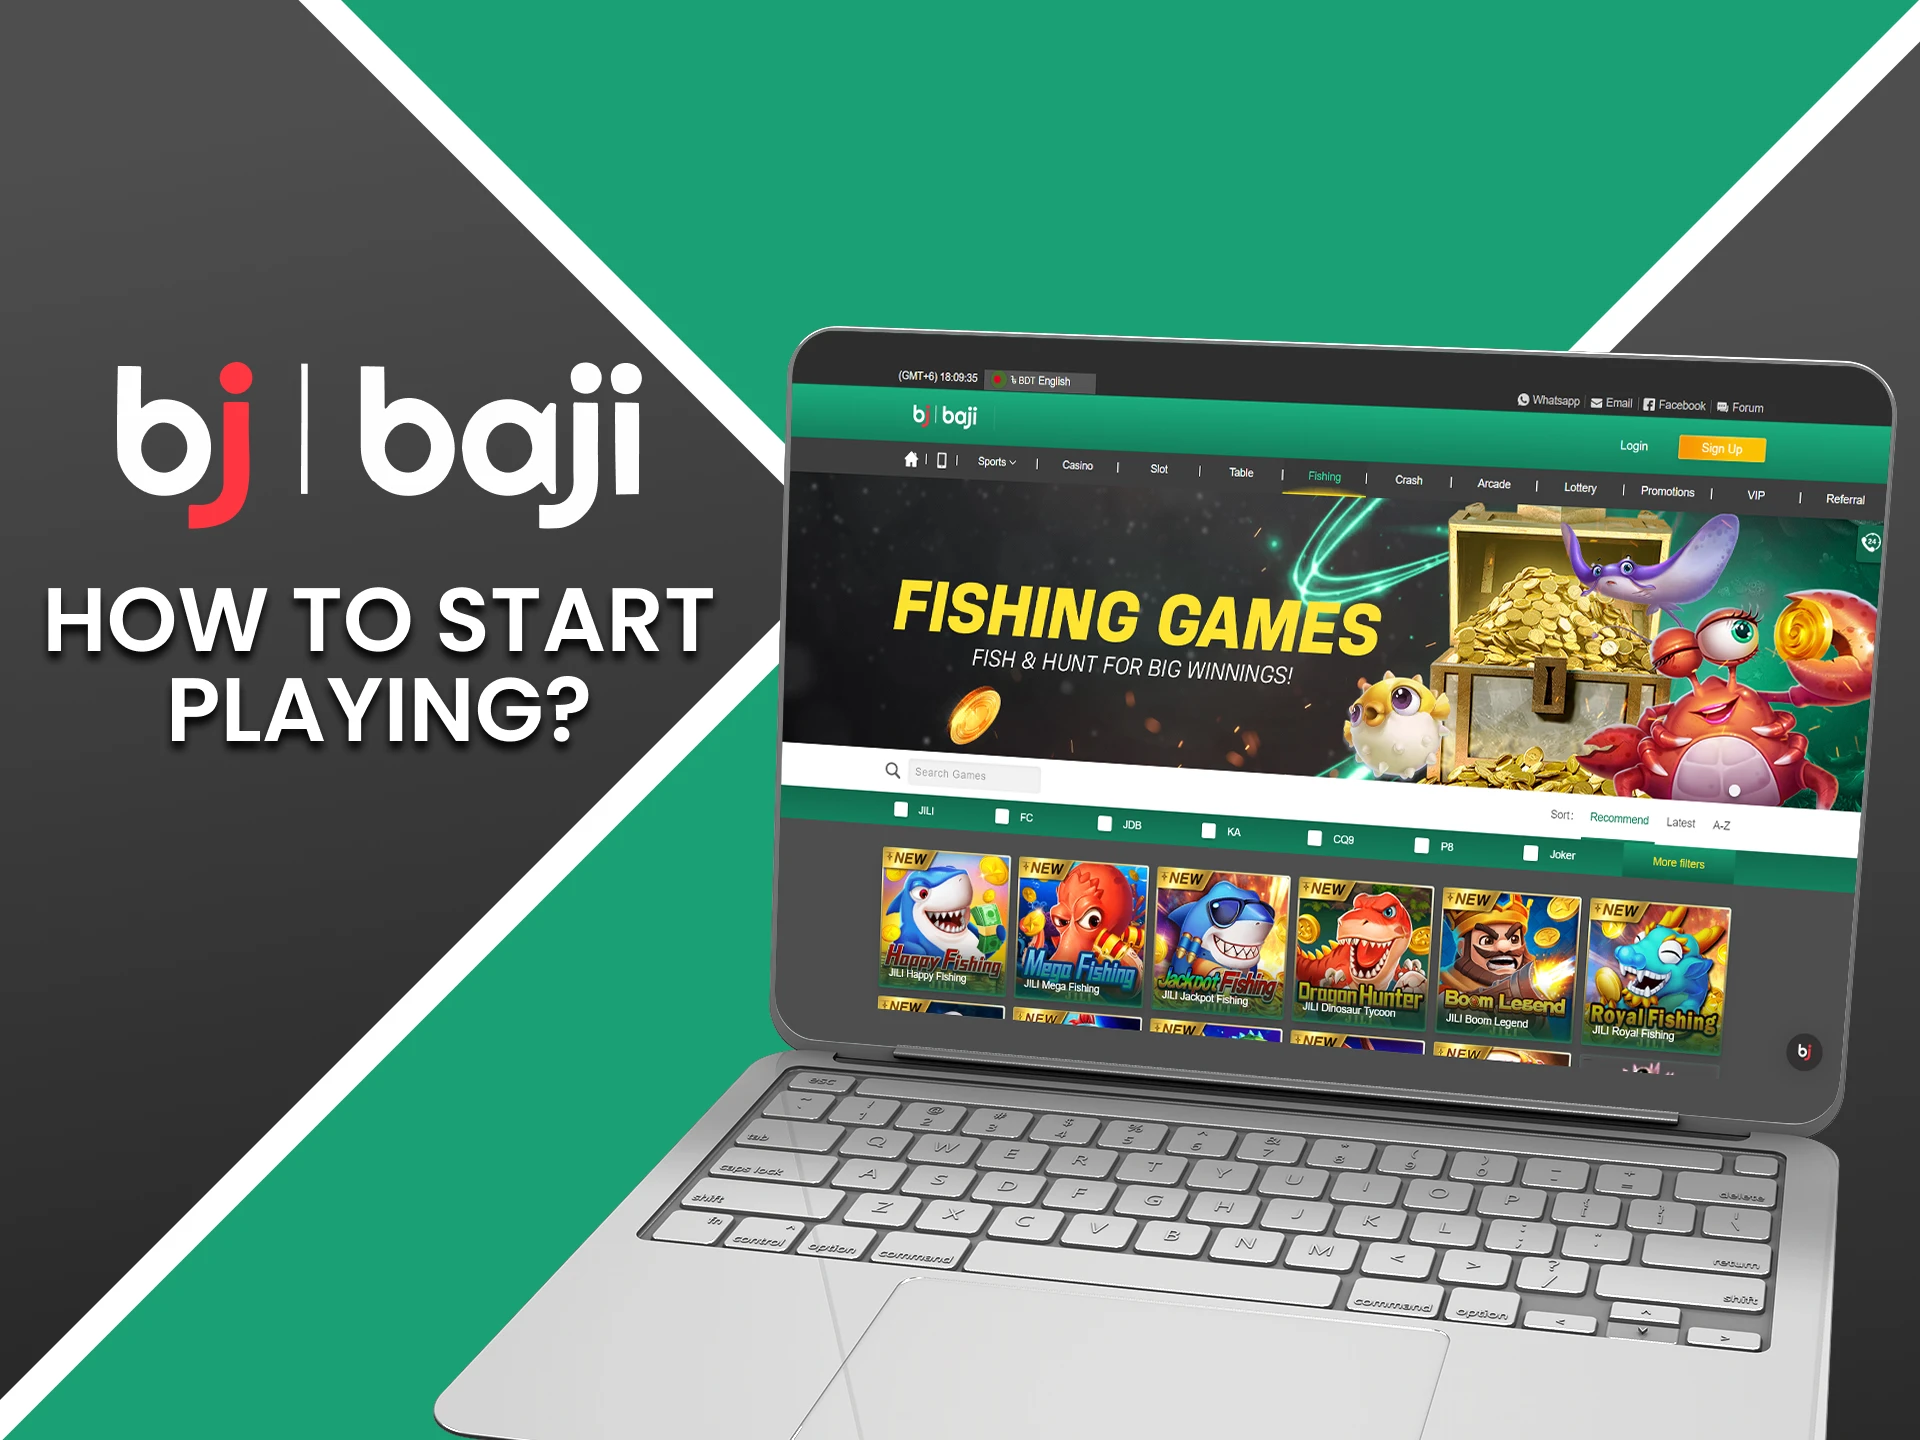 We will tell you how to choose the genre of fishing games on the Baji website.